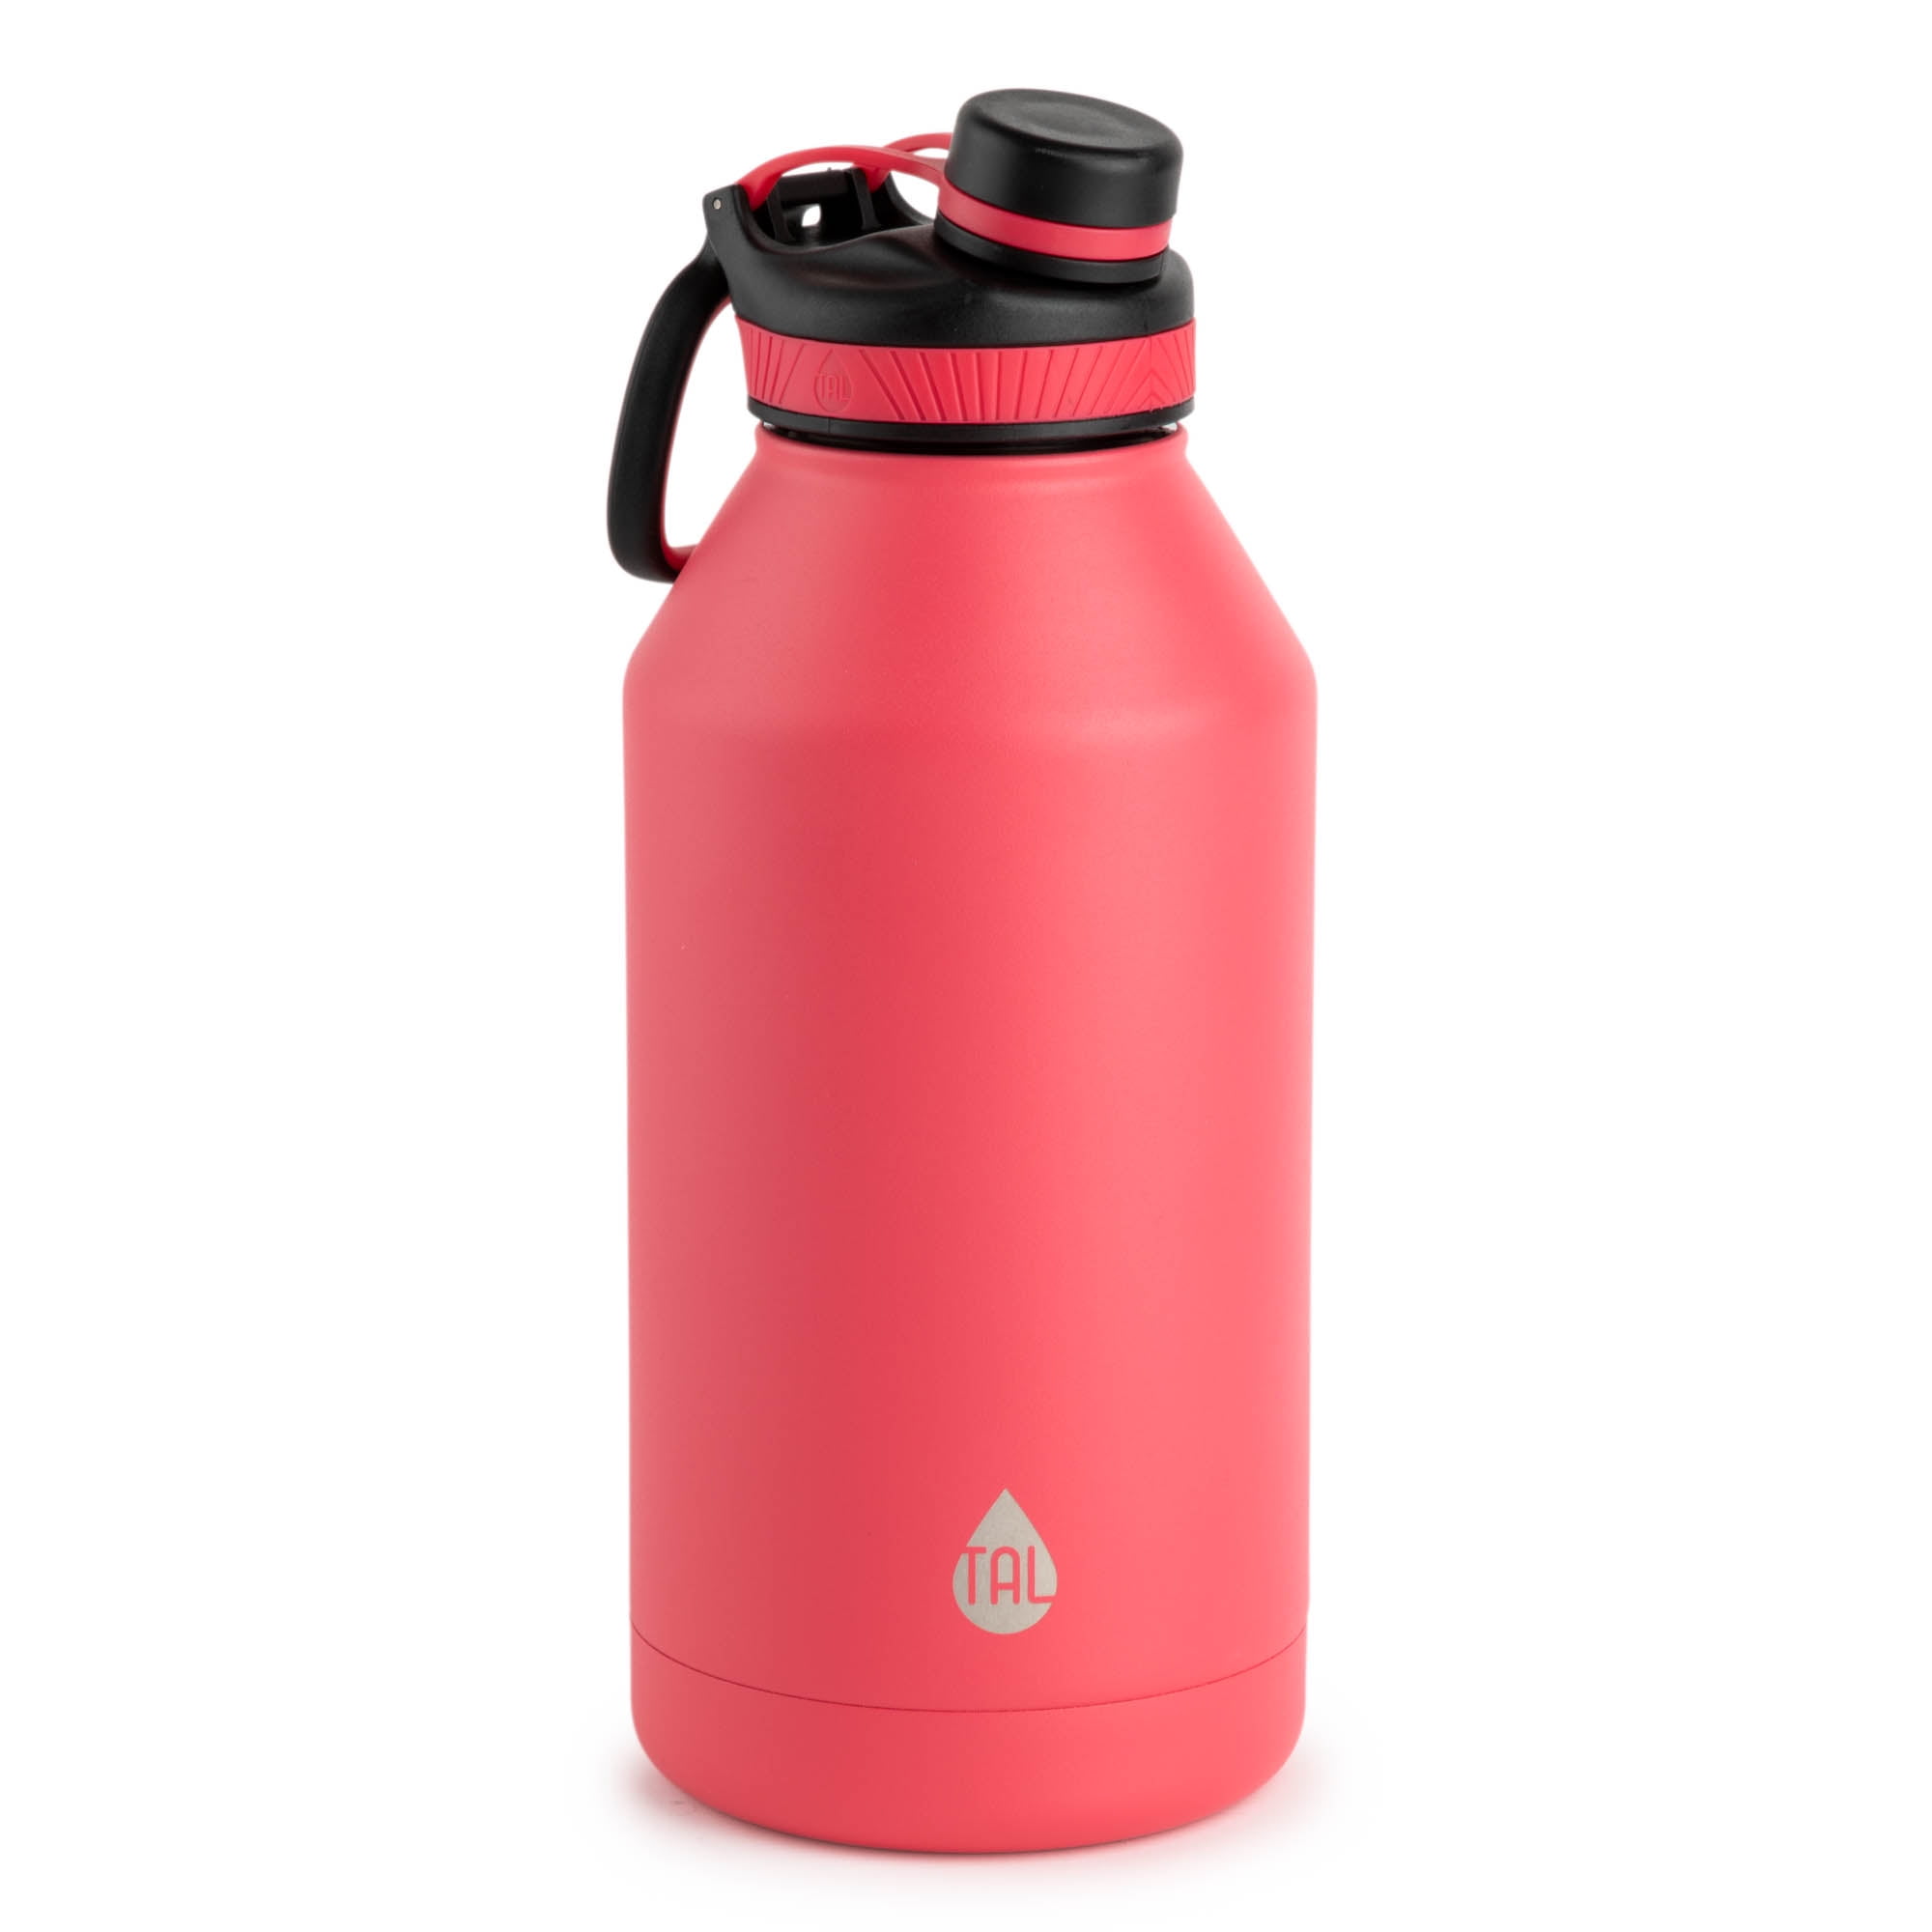 RANGLAND 64 oz Tumbler with Handle and Straw Lid - Insulated Metal Water  Bottle with Carrier Bag Hol…See more RANGLAND 64 oz Tumbler with Handle and